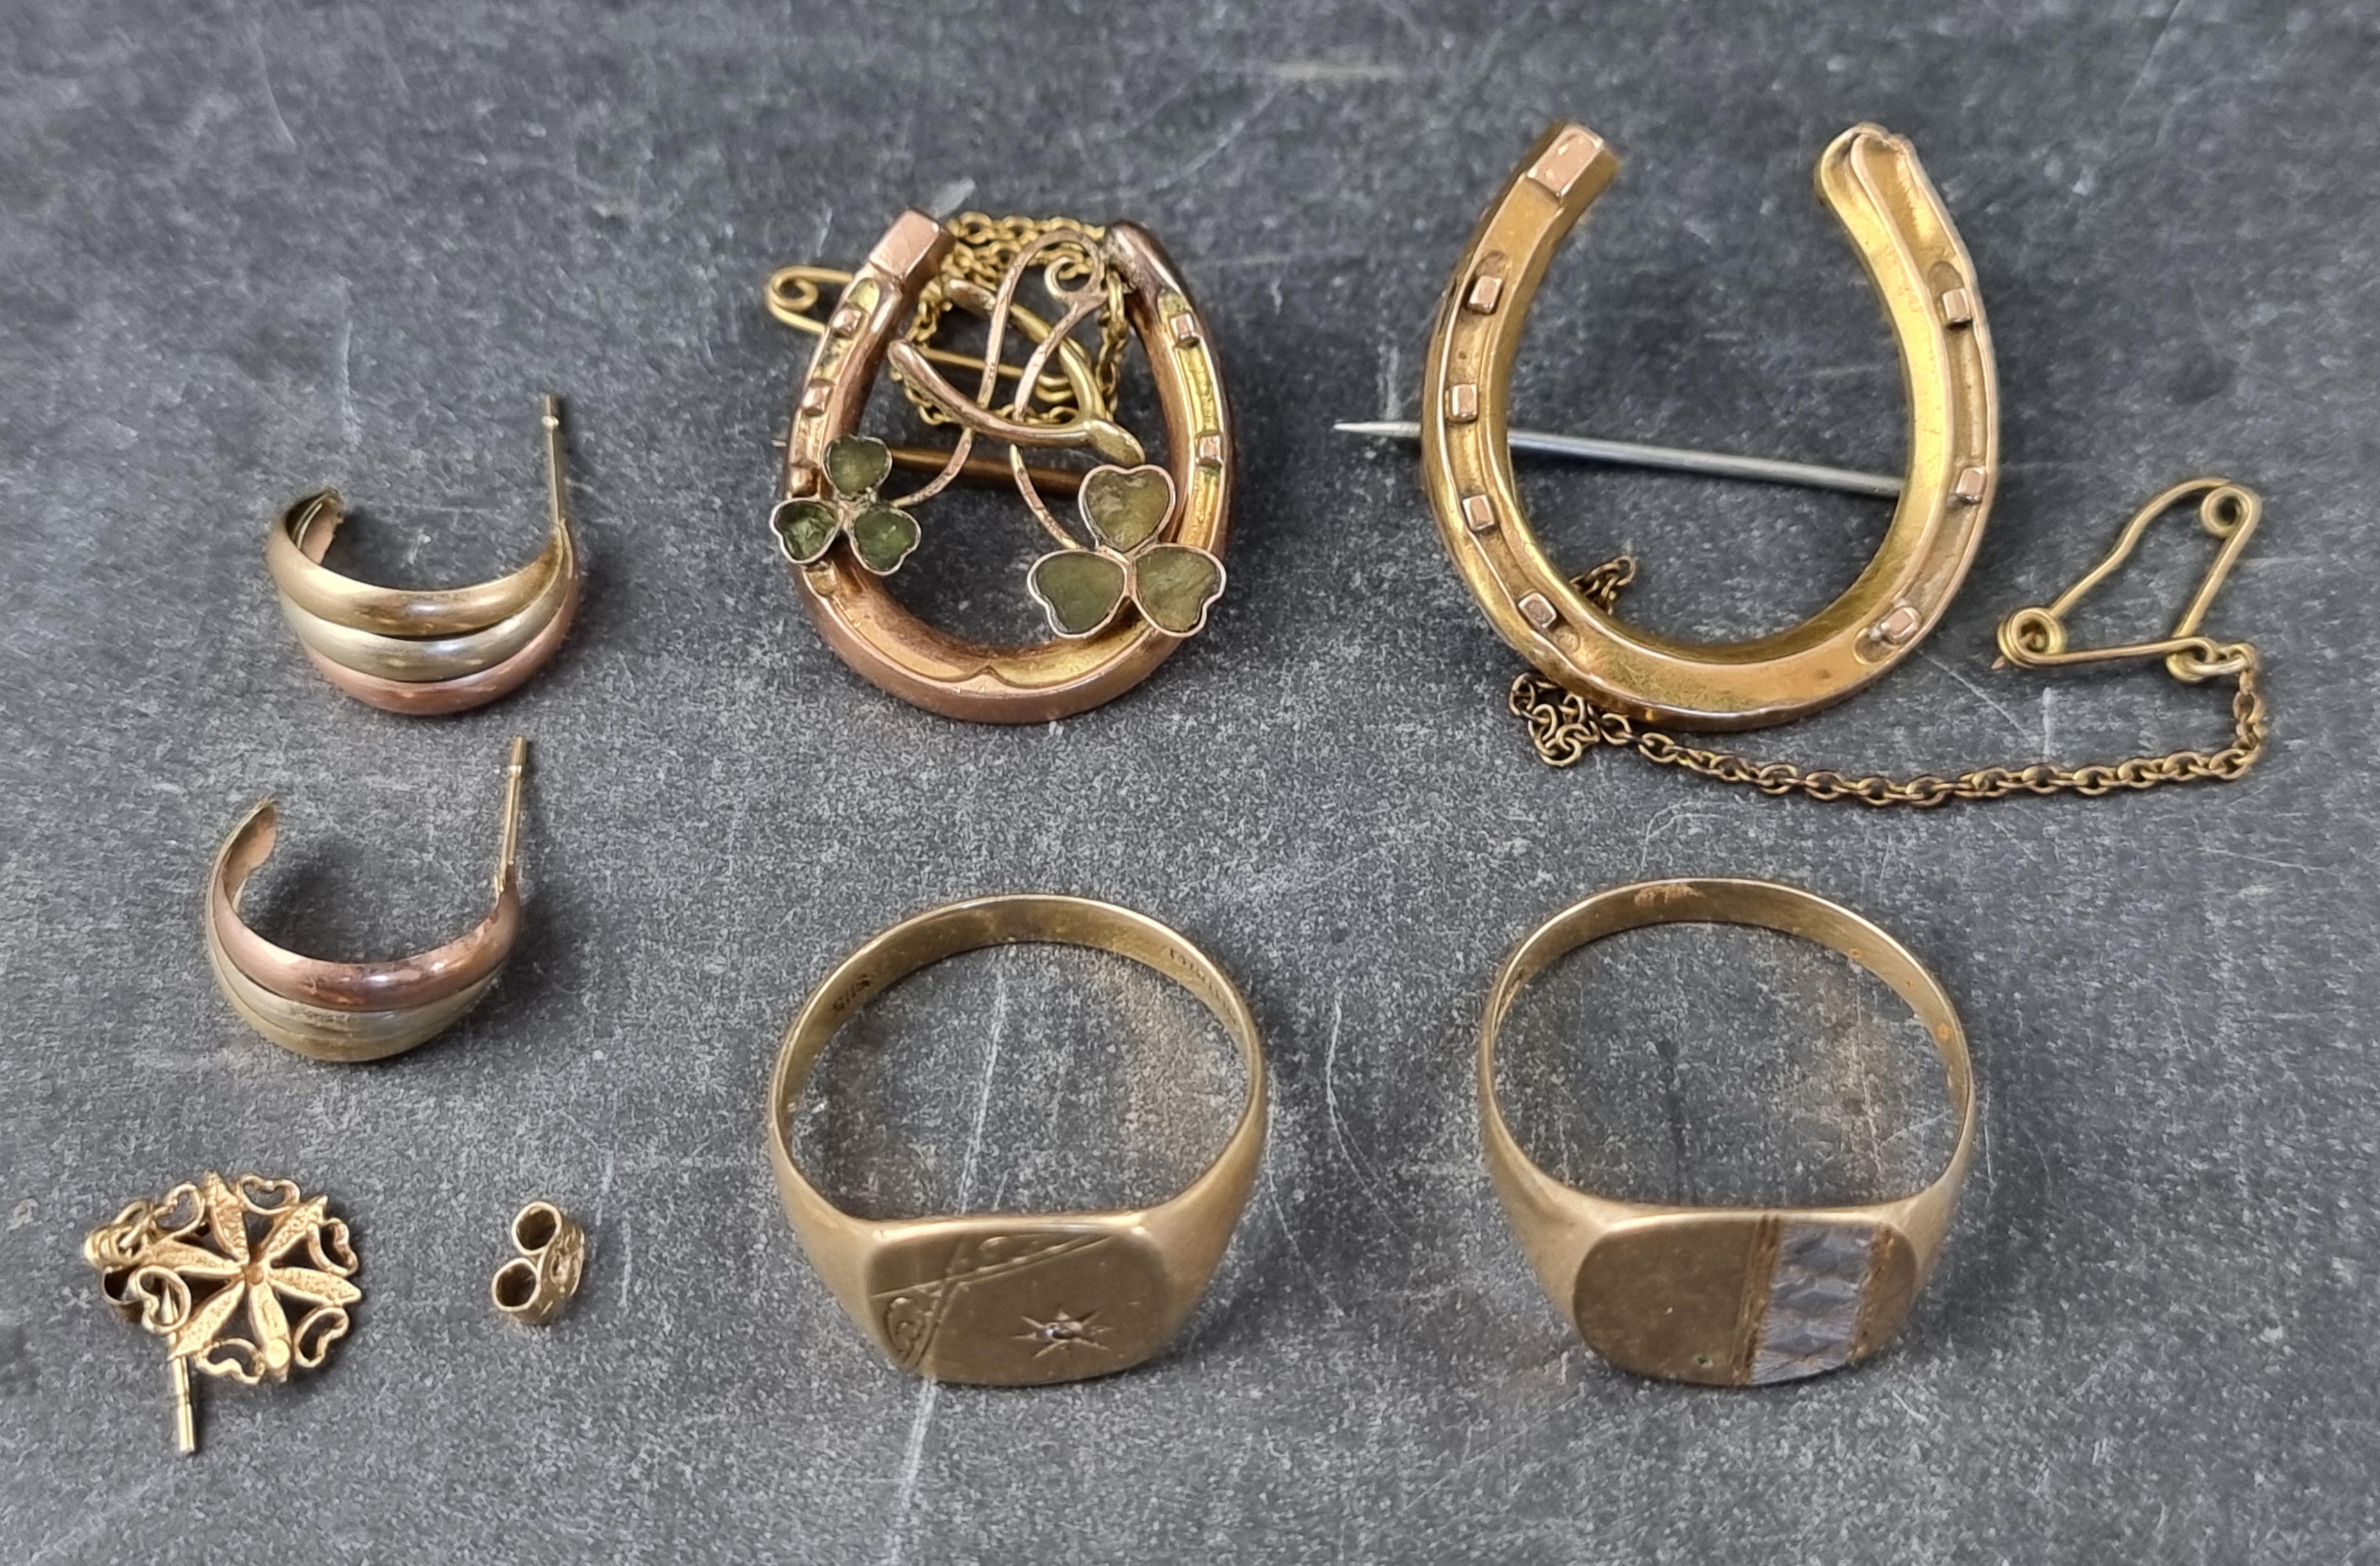 Two 9ct gold signet rings and a 9ct gold horseshoe brooch, 9.4g; together with a pair of yellow